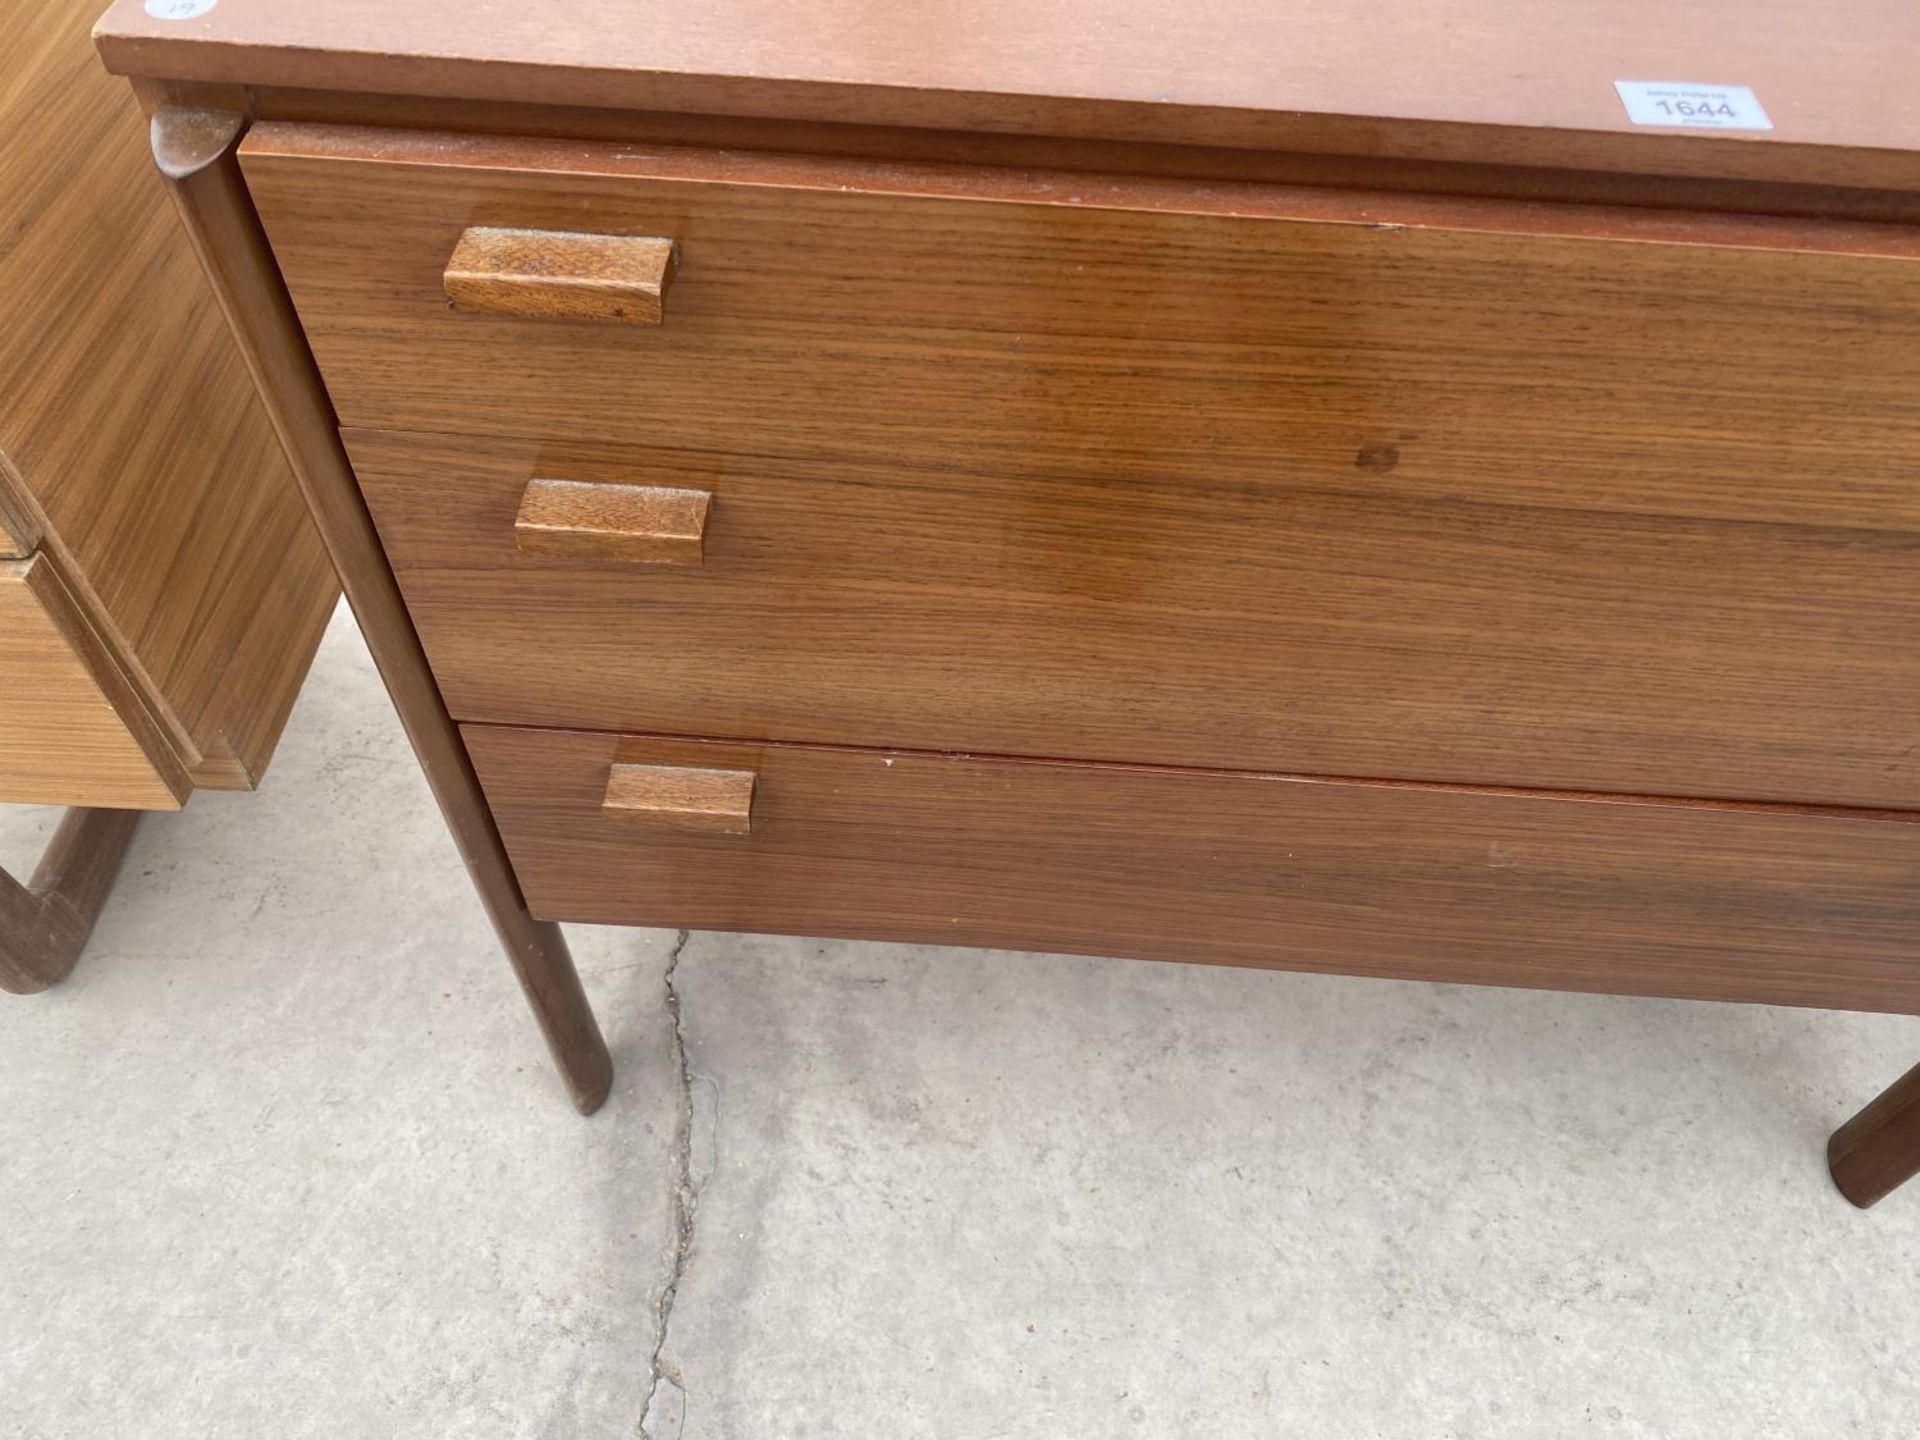 A TEAK CHEST OF THREE DRAWERS - Image 3 of 4